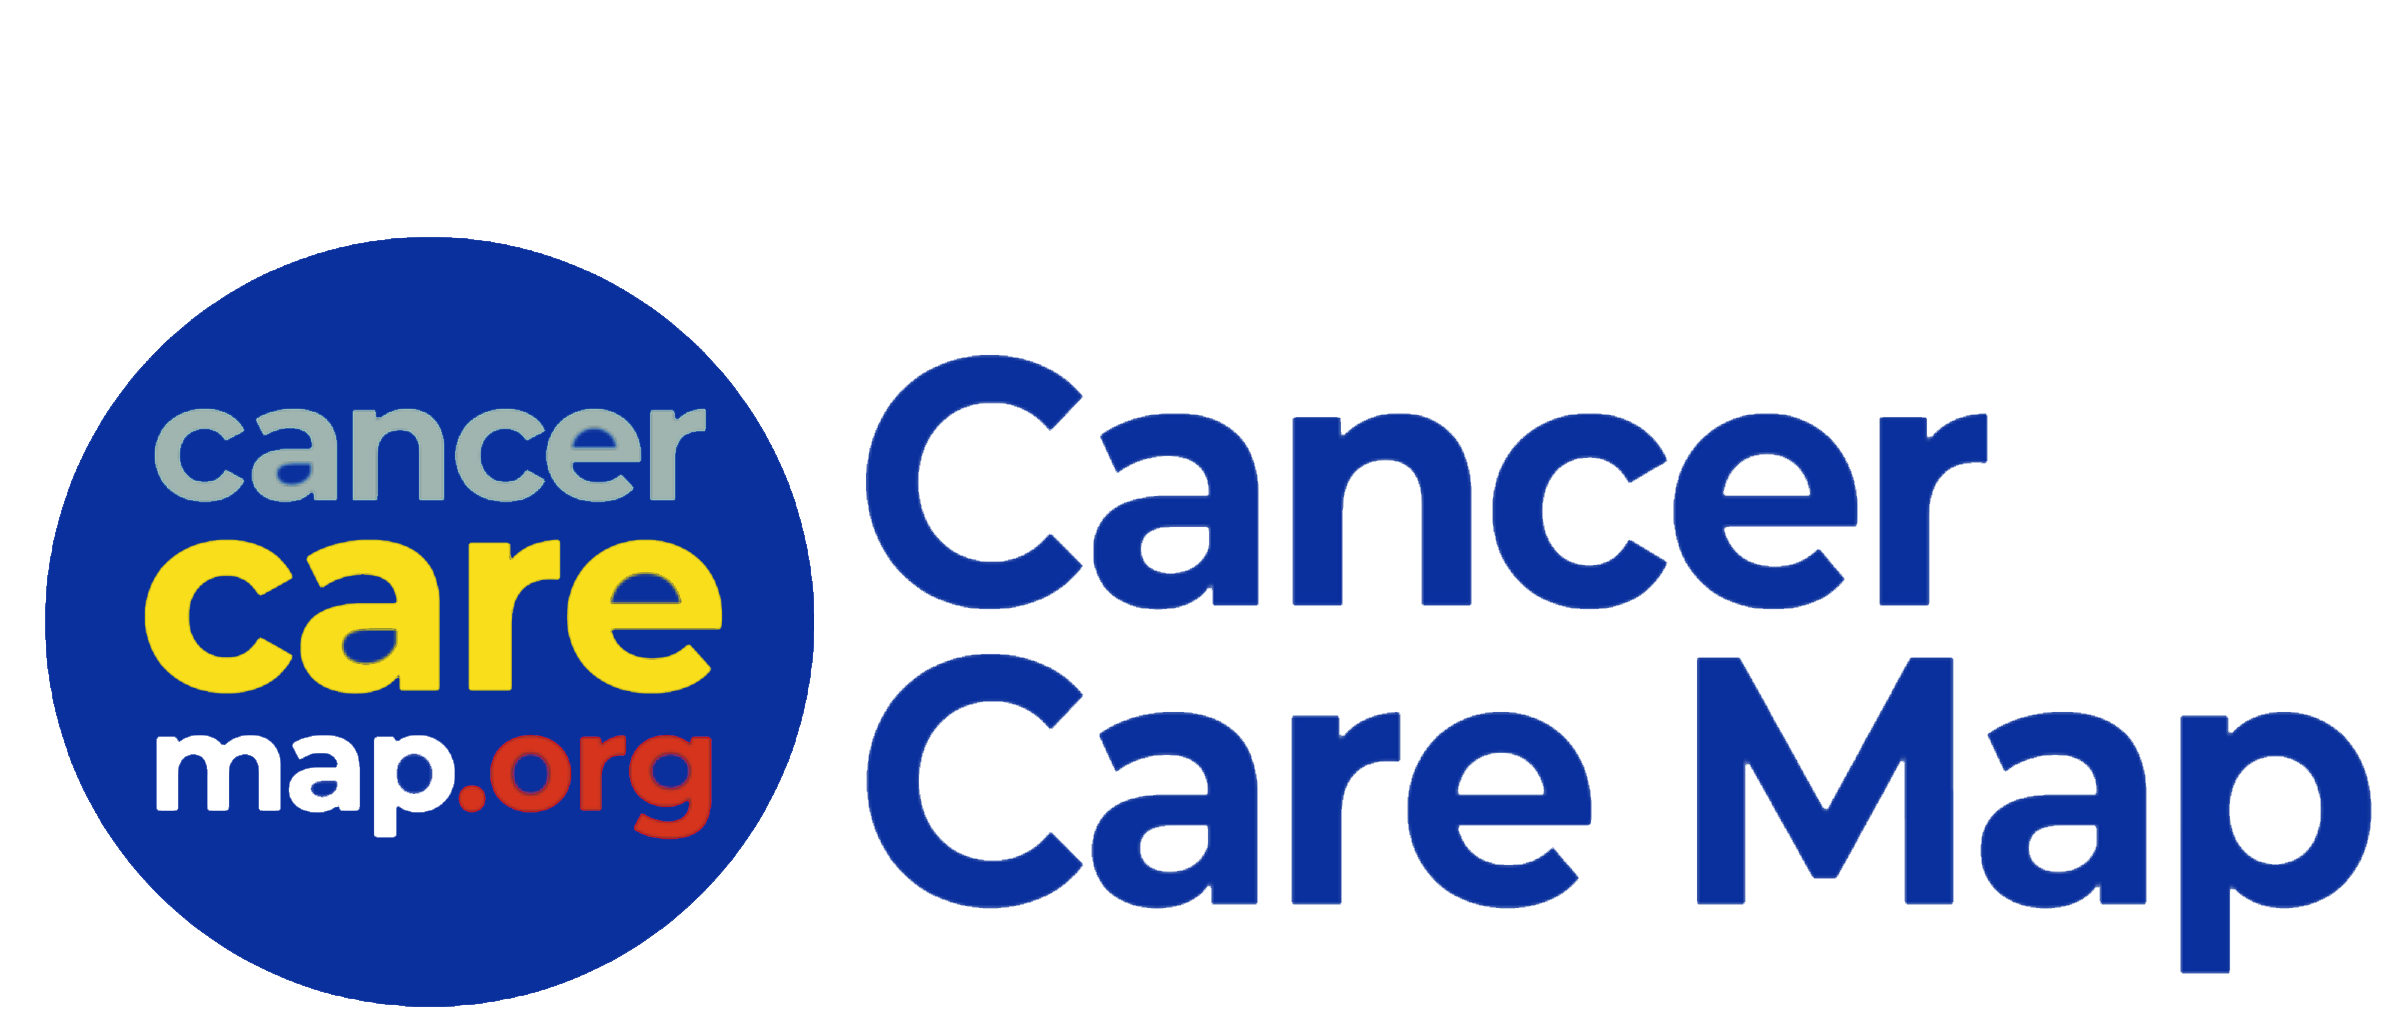 Cancer Care Map 02 1 